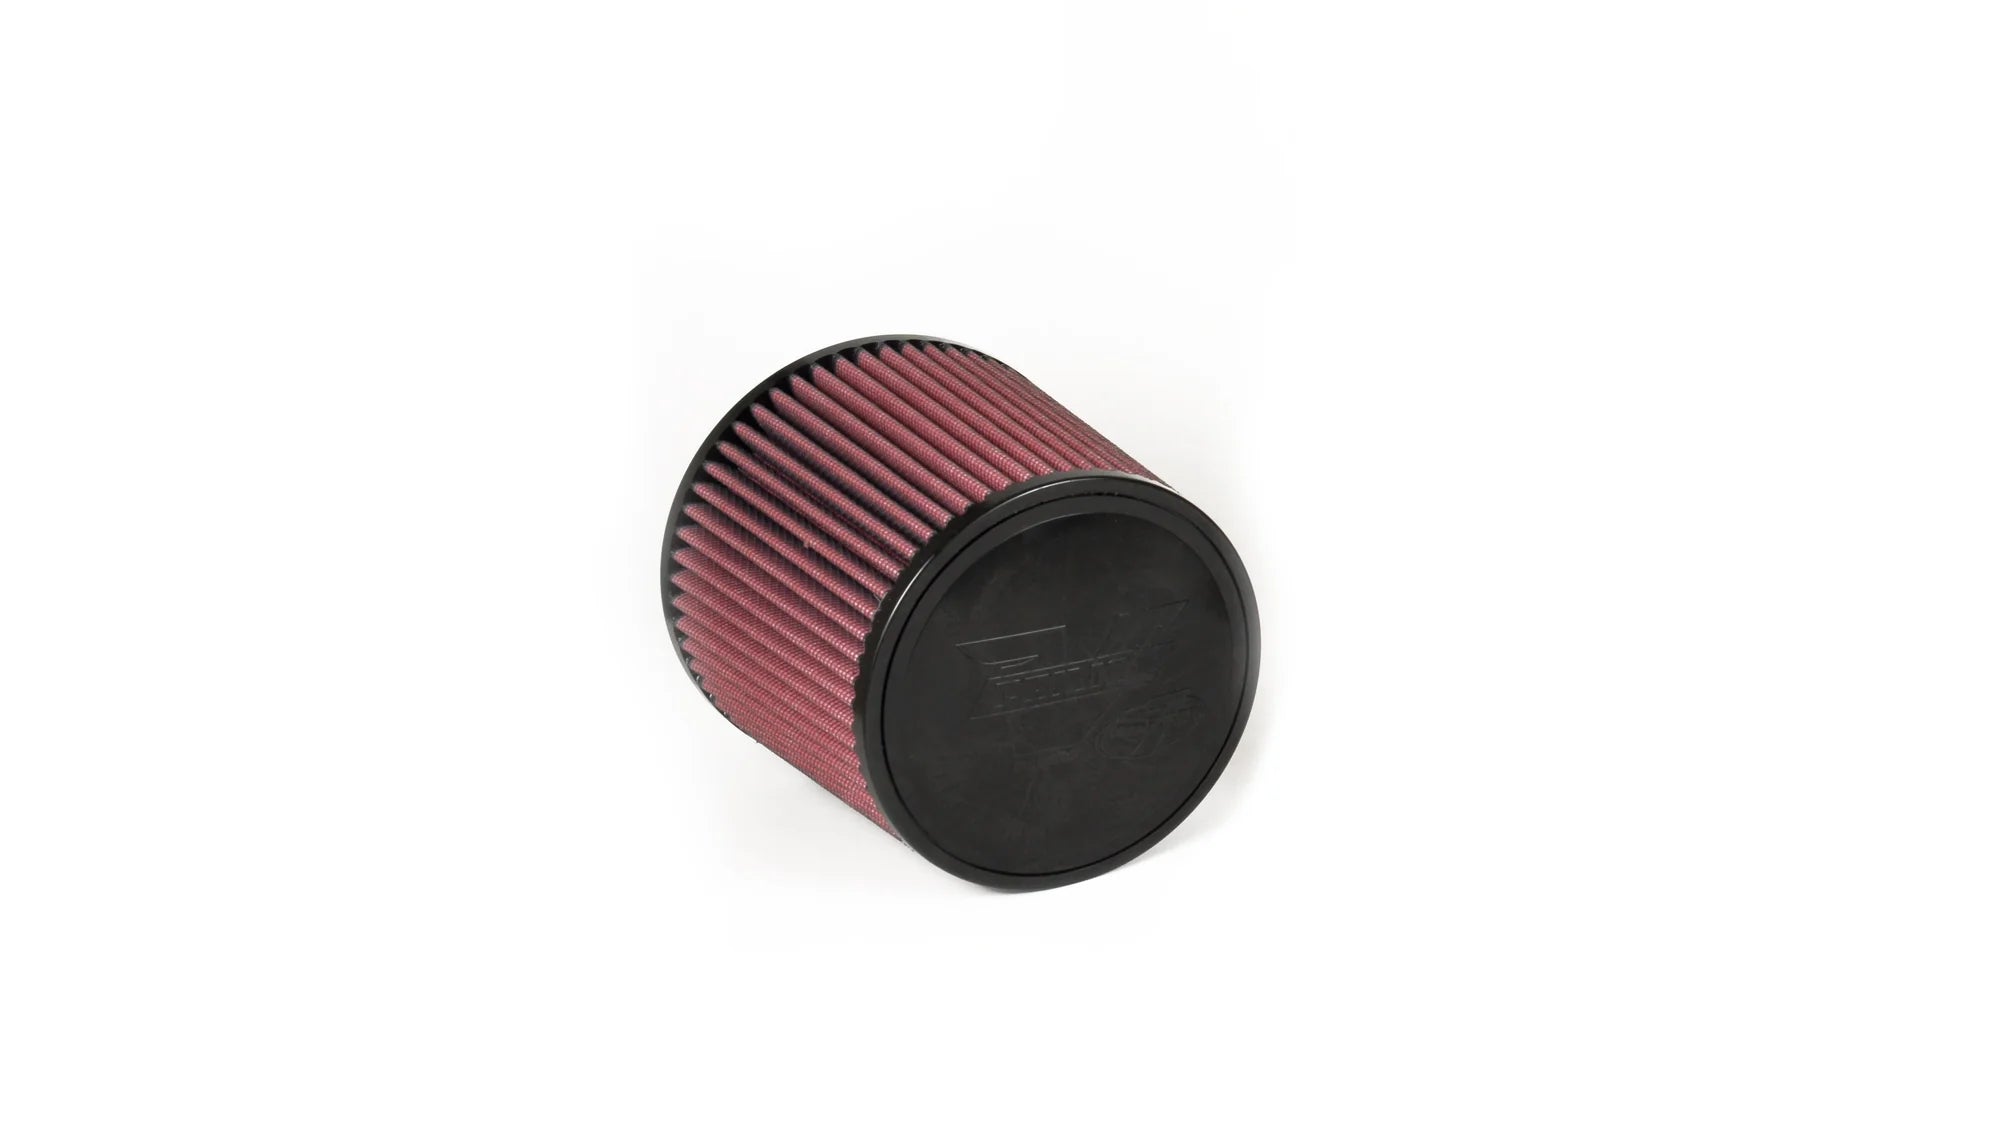 Volant Primo Diesel Oiled Air Filter (4in Flange ID/8in x 7in x 7in) Replacement Air Filter - 5154